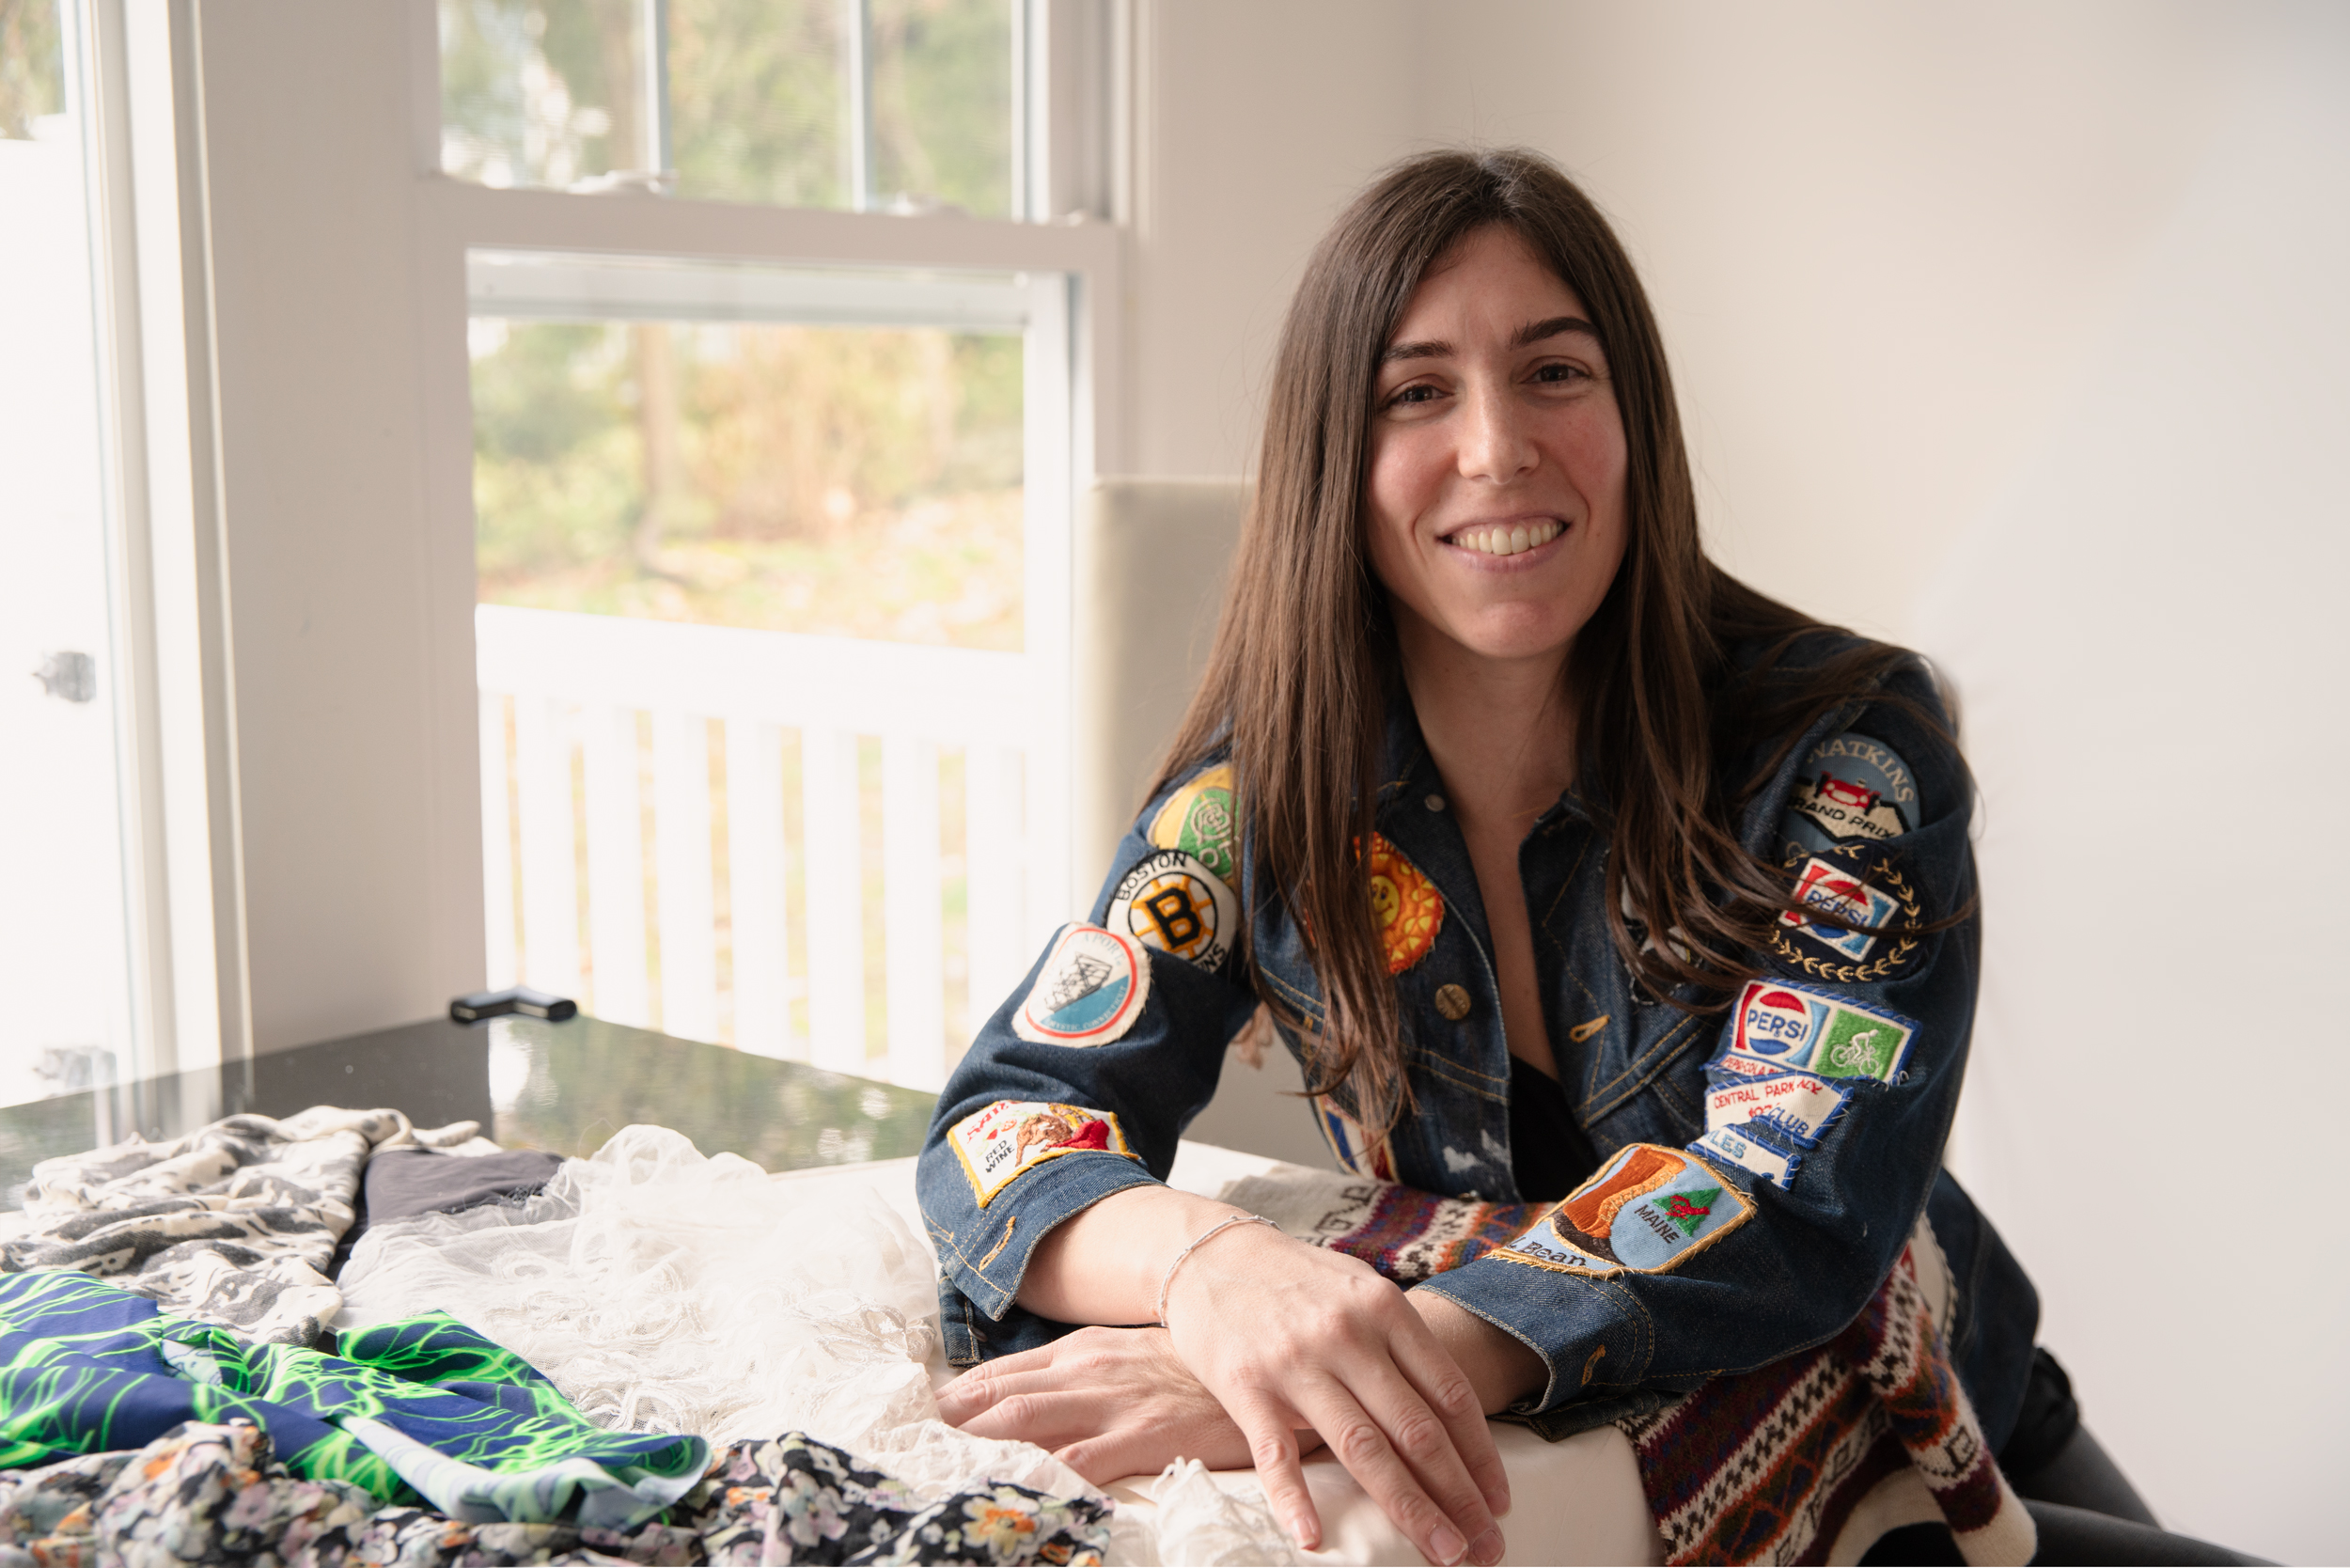 Stephanie Benedetto sits in her home with fabric